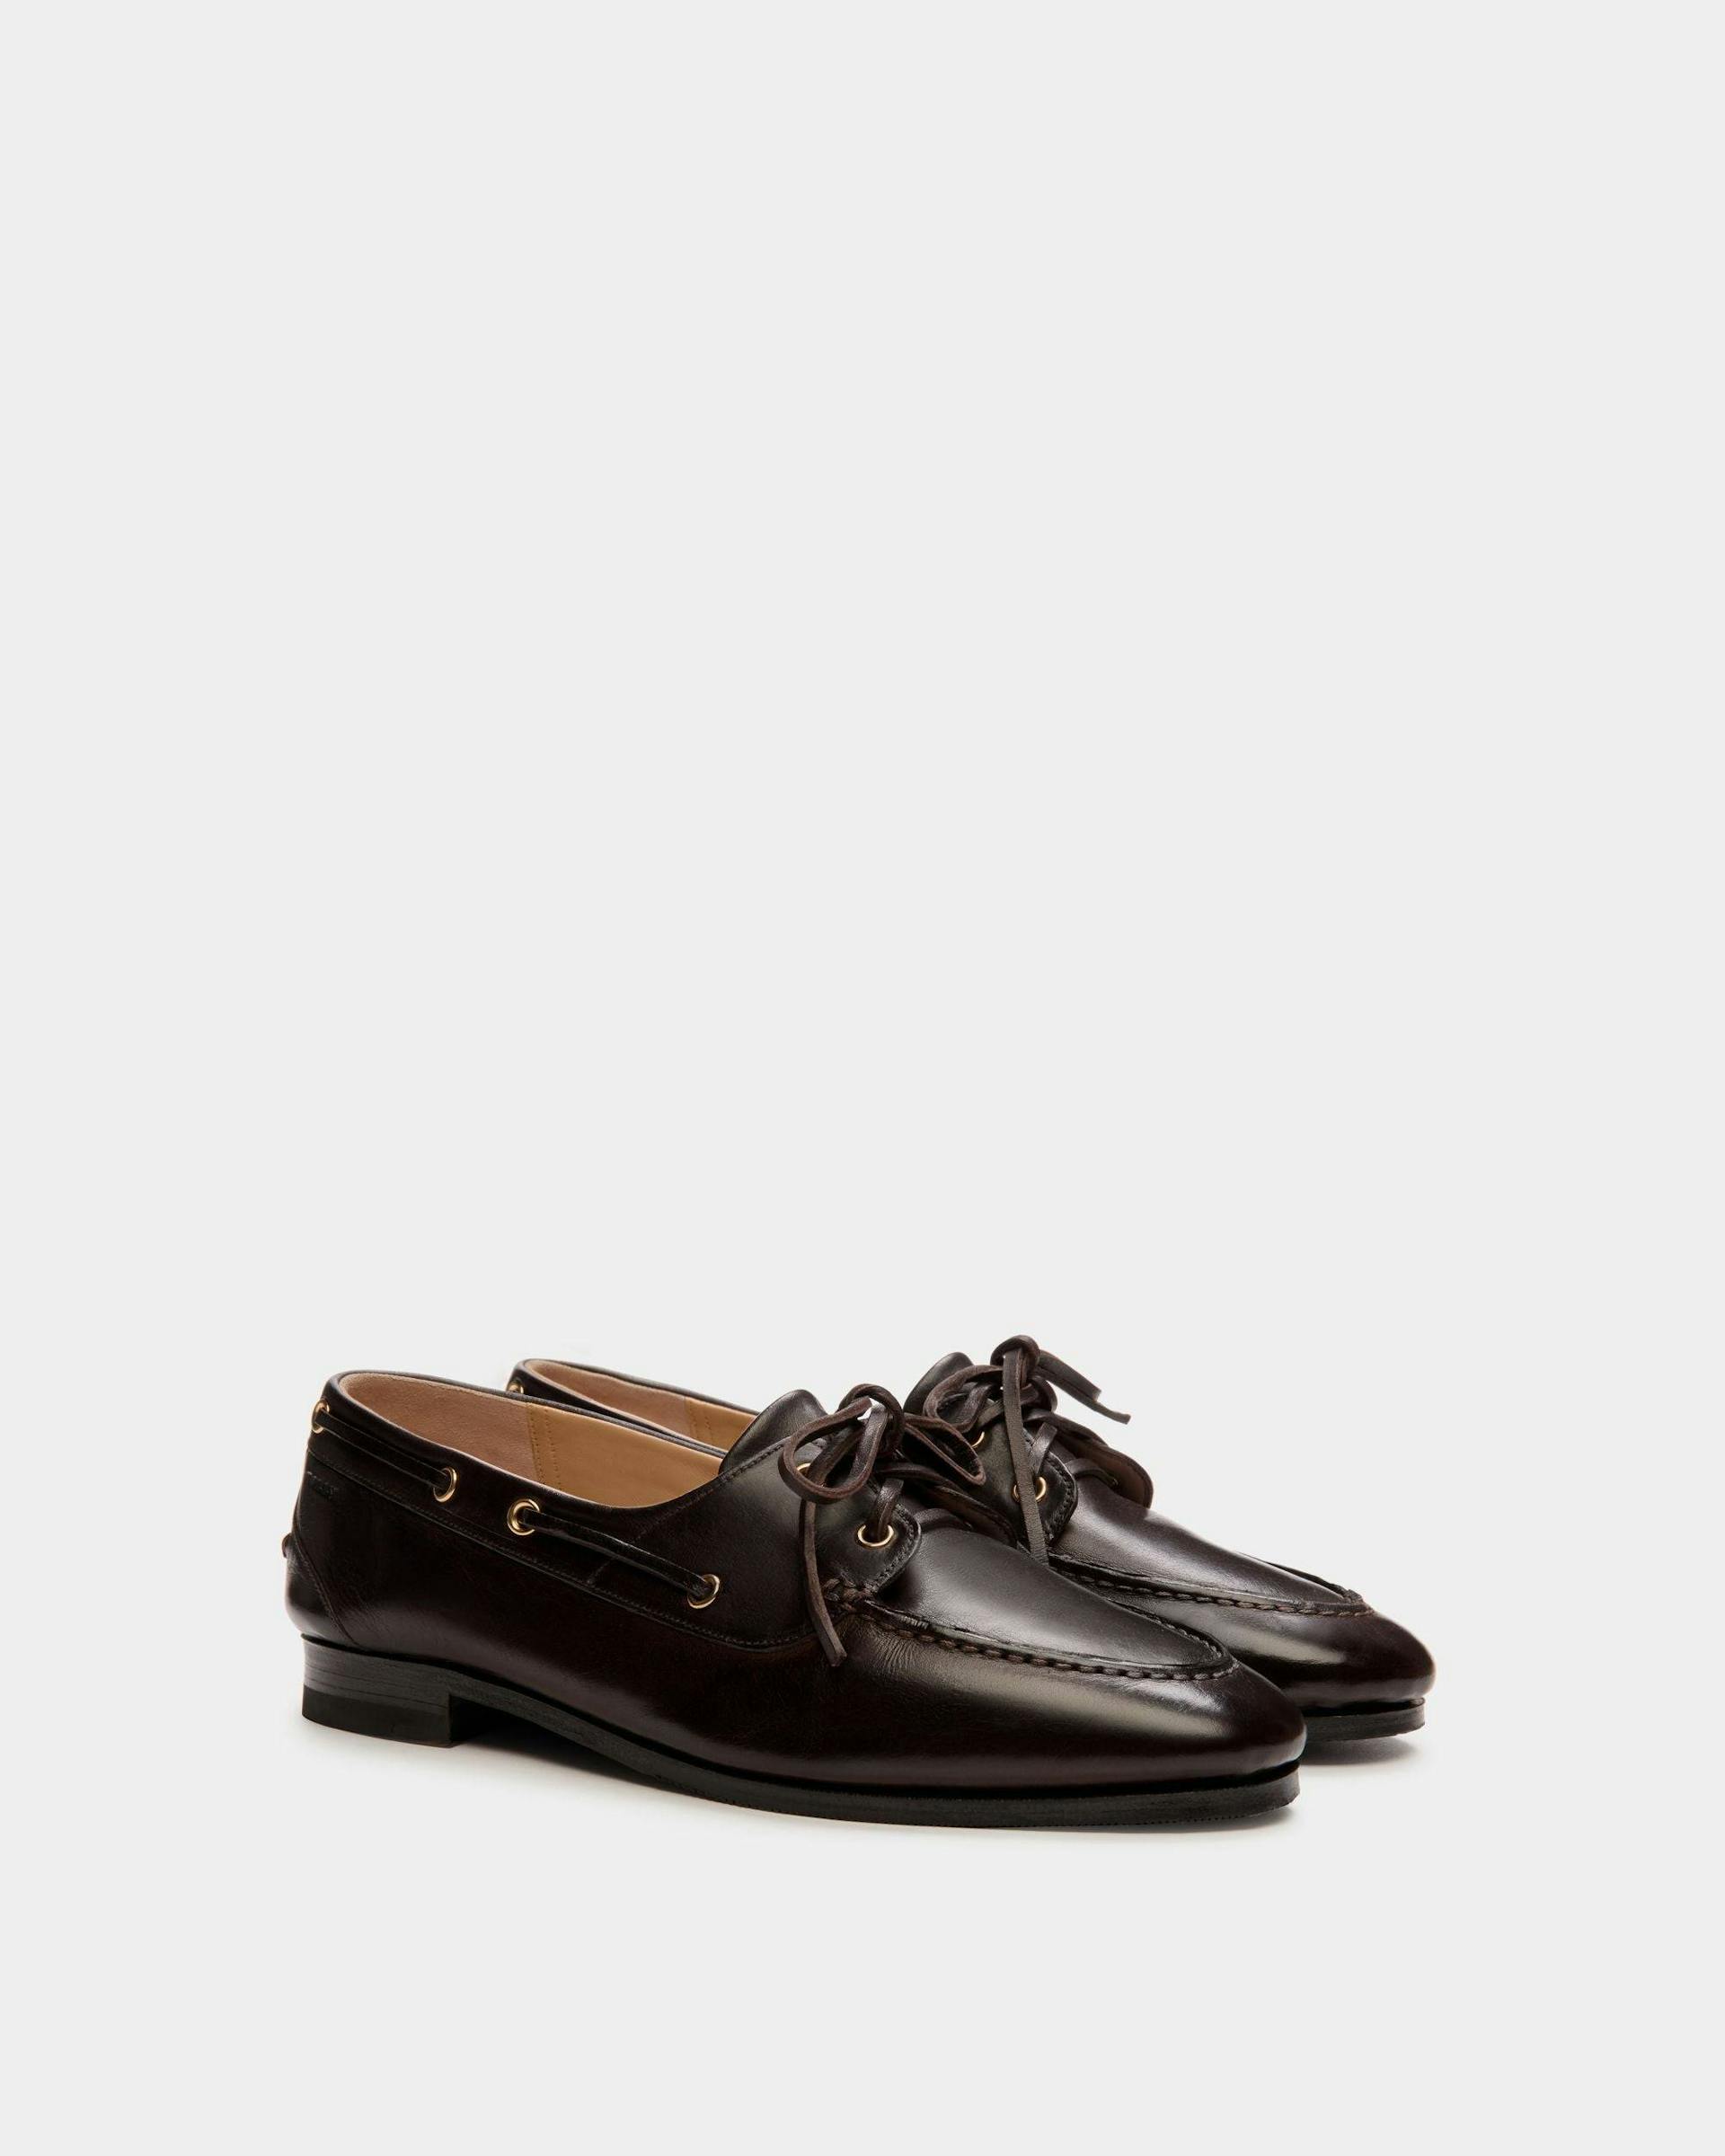 Women's Plume Moccasin in Dark Brown Leather | Bally | Still Life 3/4 Front